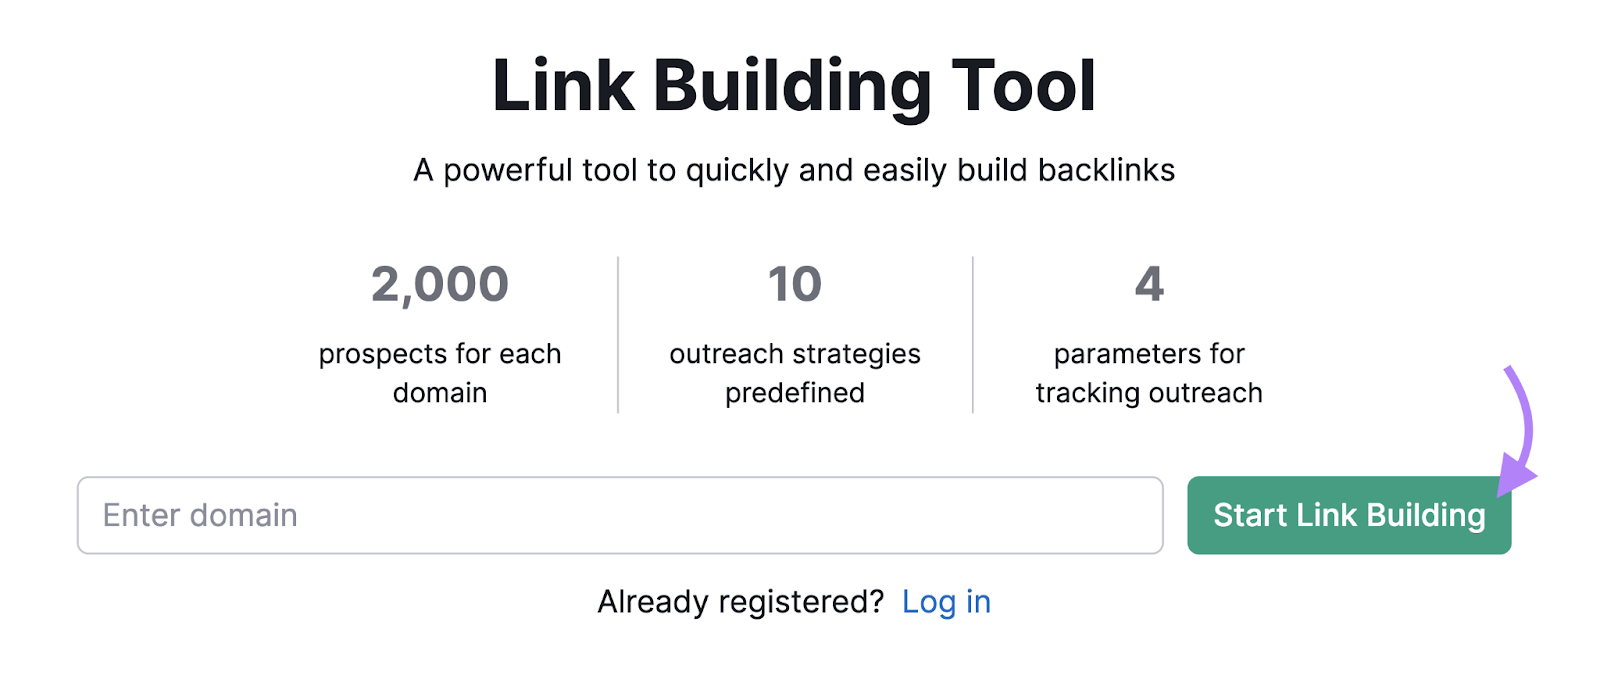 Link Building Tool search